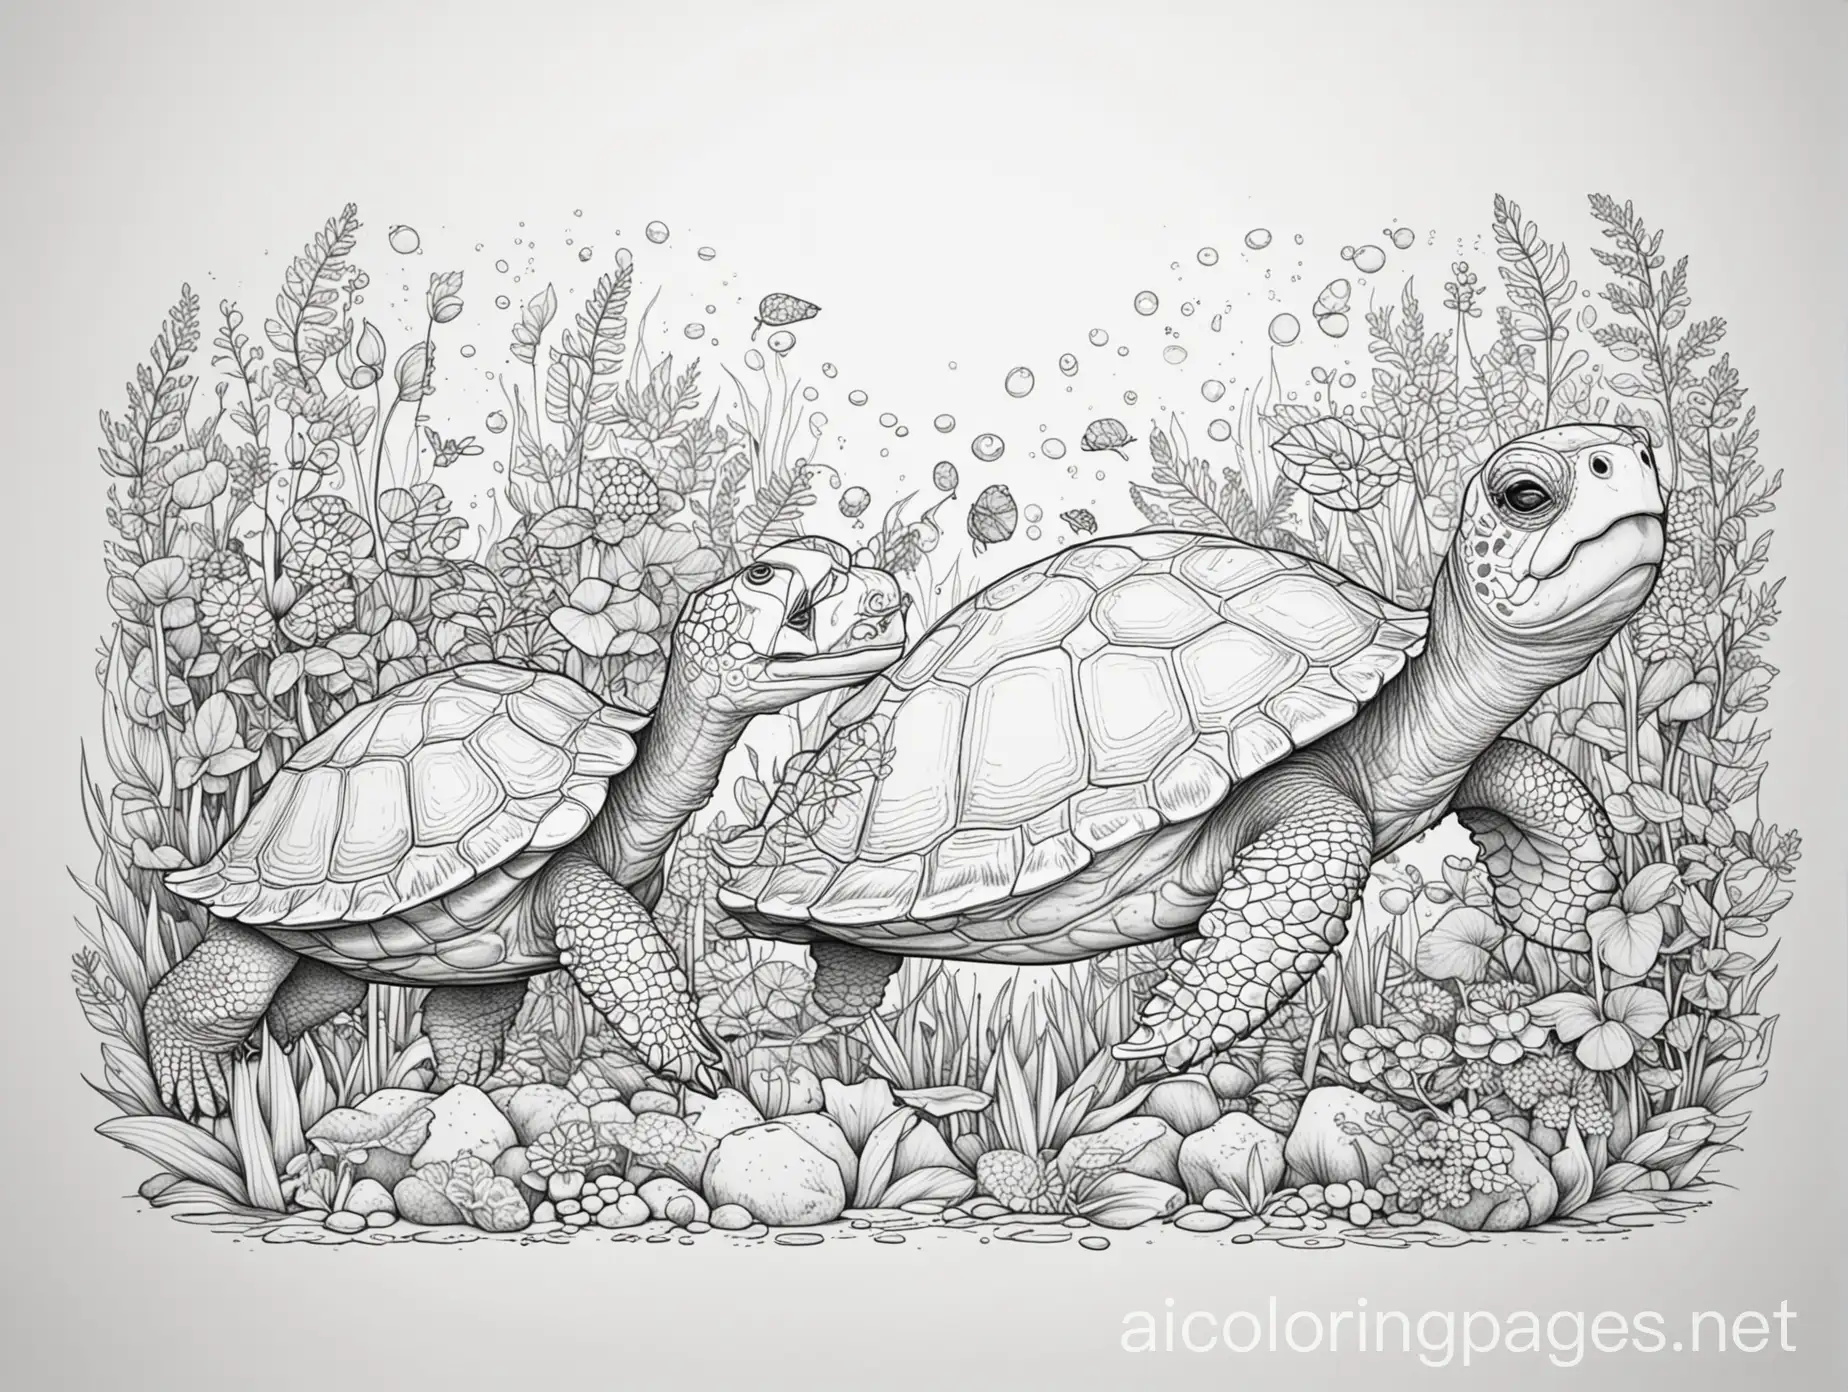 Happy-Turtle-and-Friends-Morning-Coloring-Page-with-Ample-White-Space